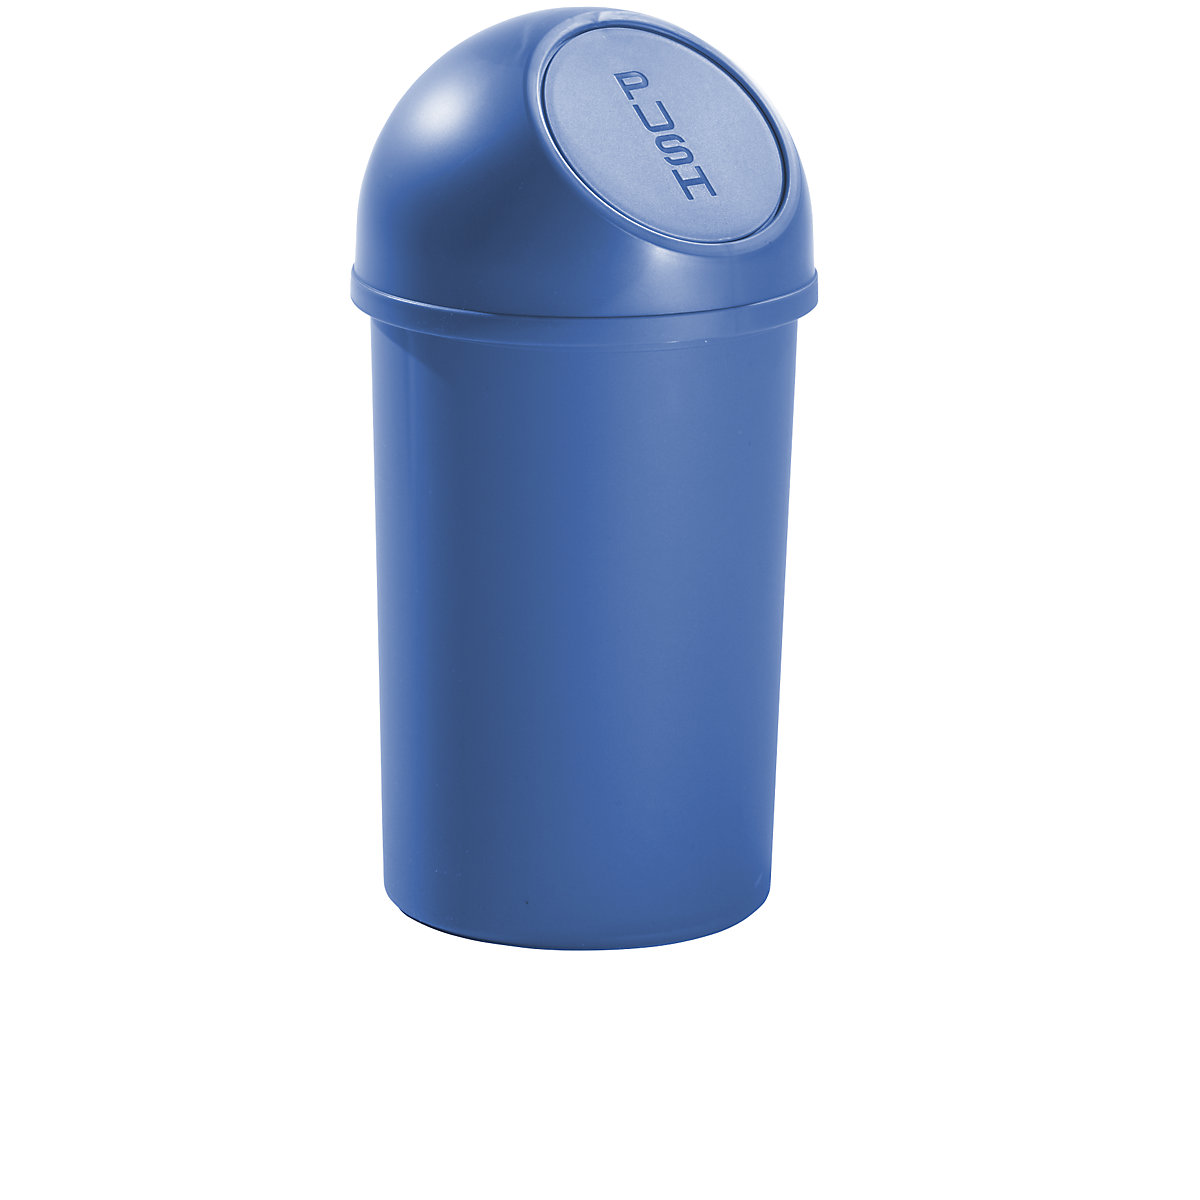 Push top waste bin made of plastic – helit, capacity 13 l, pack of 6, HxØ 490 x 252 mm, blue-3